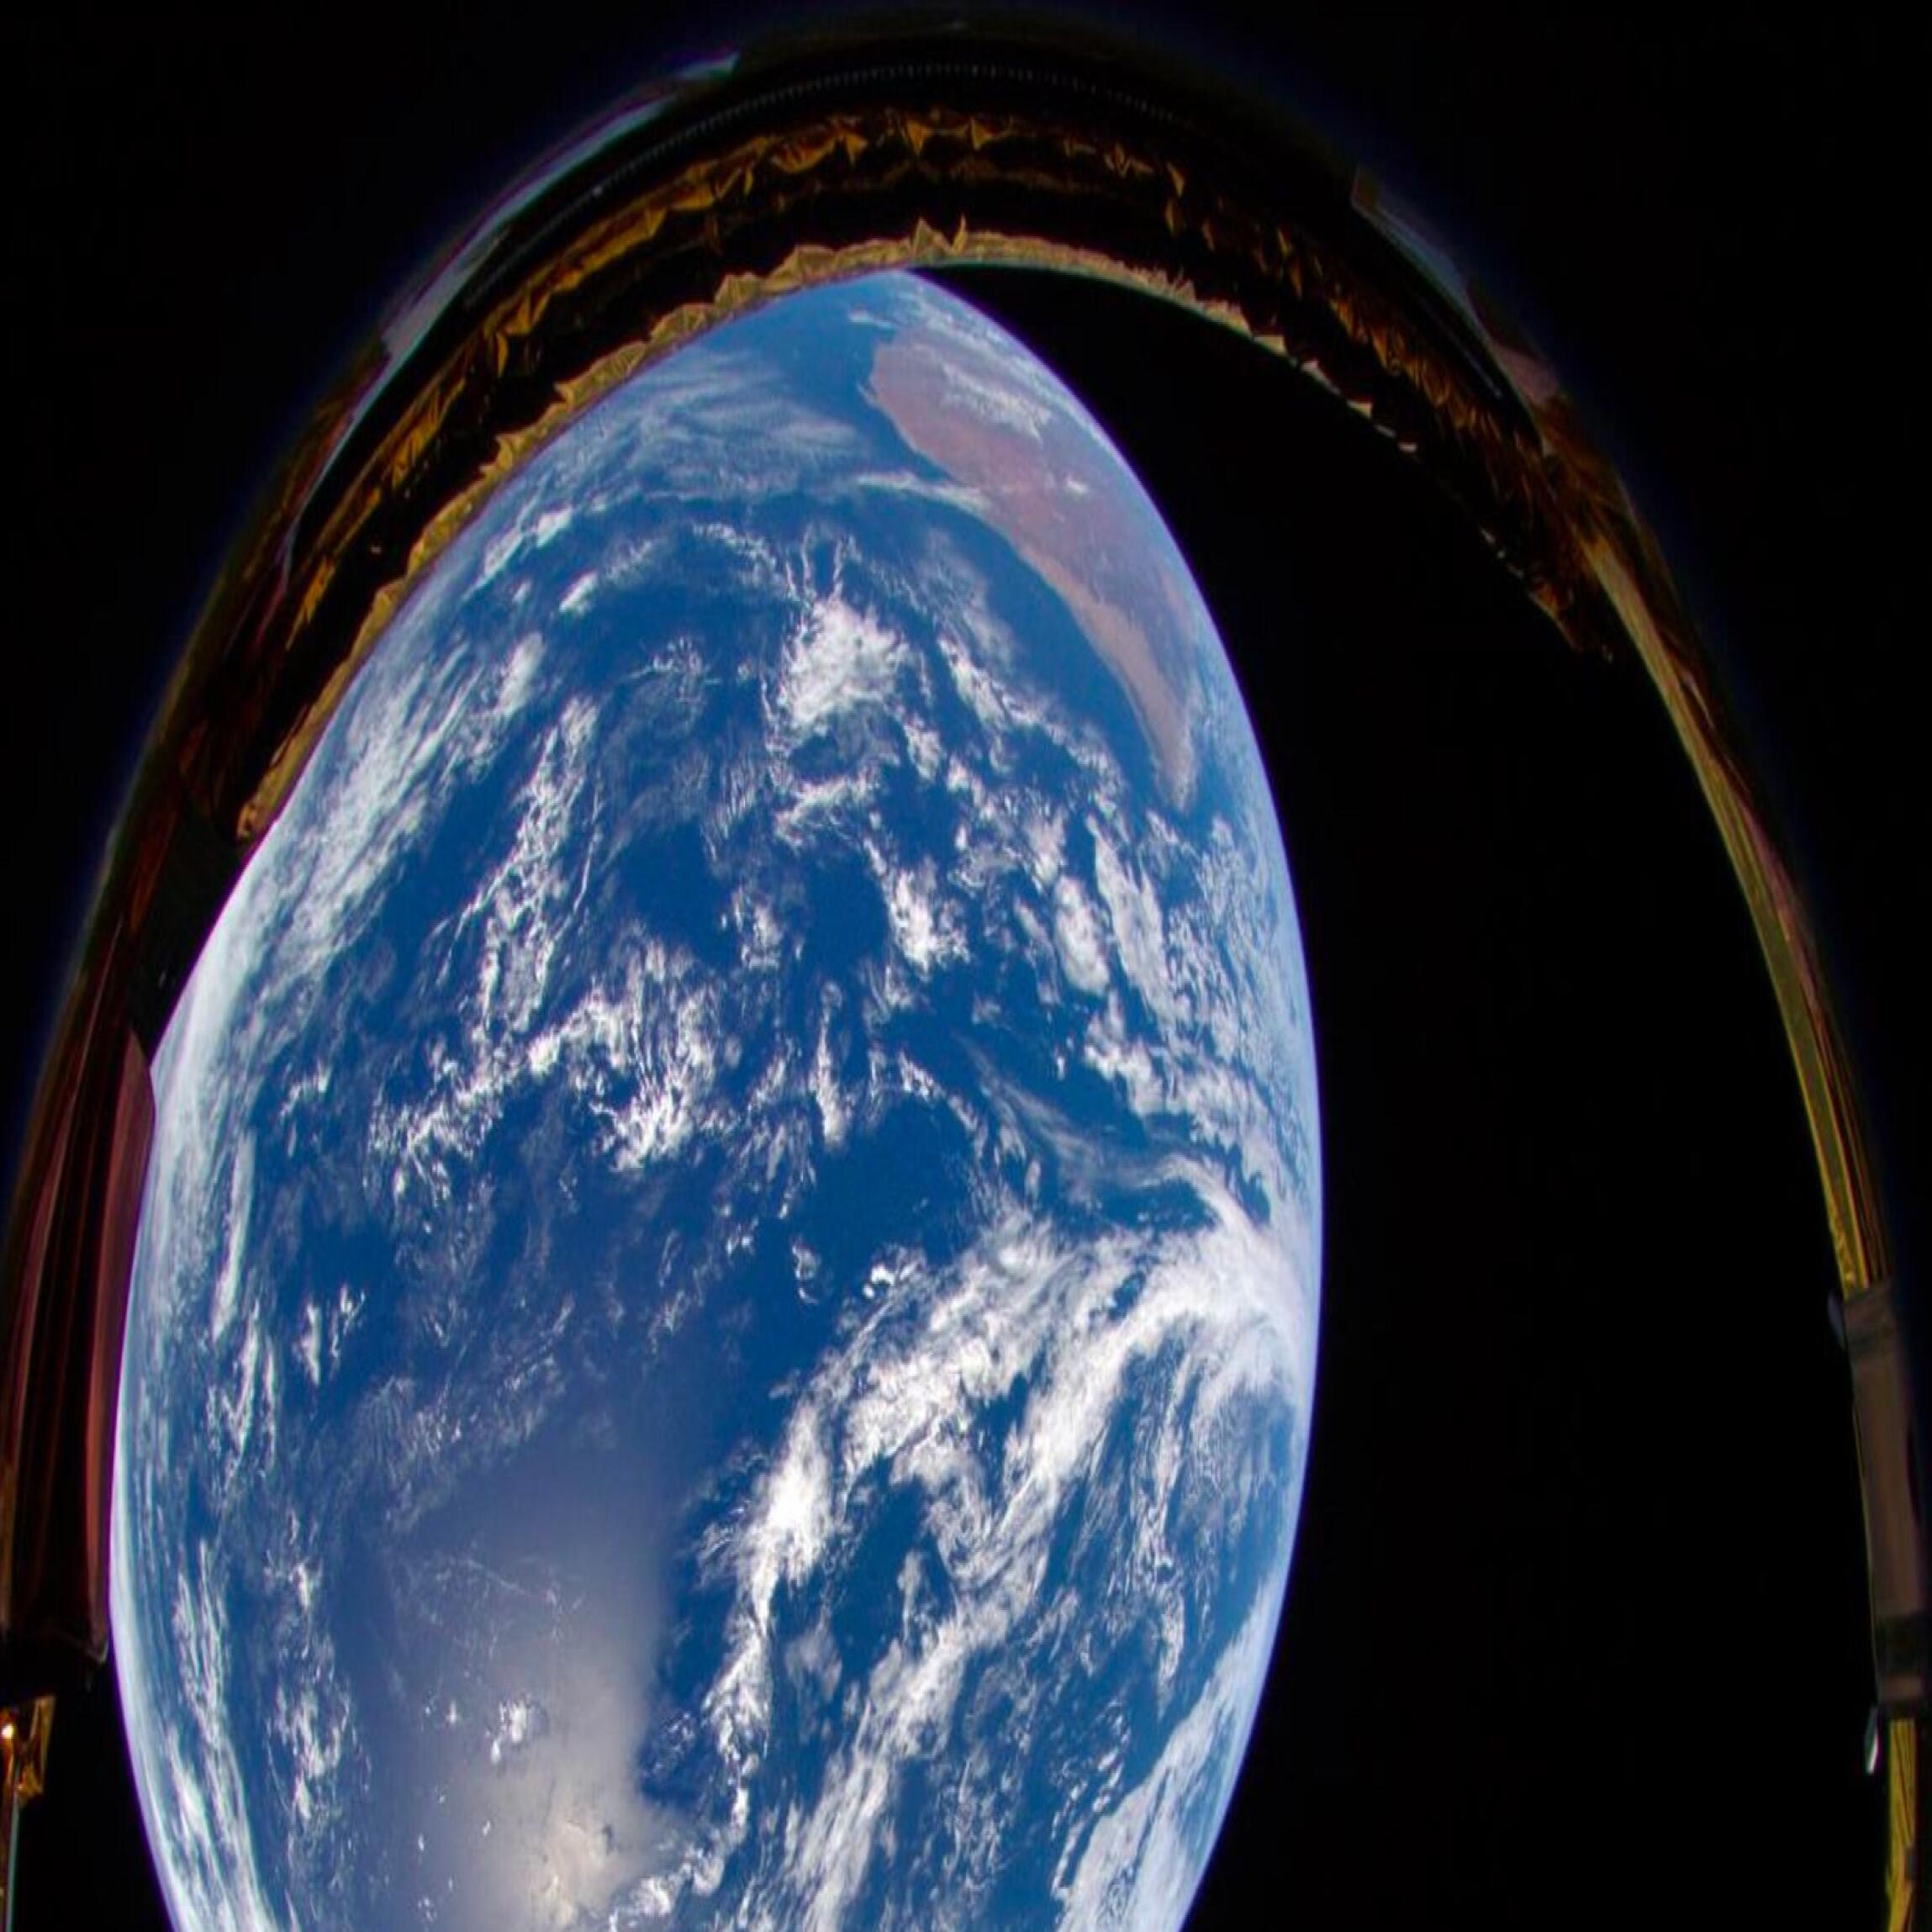 Image showing the Earth and the launch vehicle’s second stage, taken about 2 minutes after the lander separated from the rocket. Photo: ispace